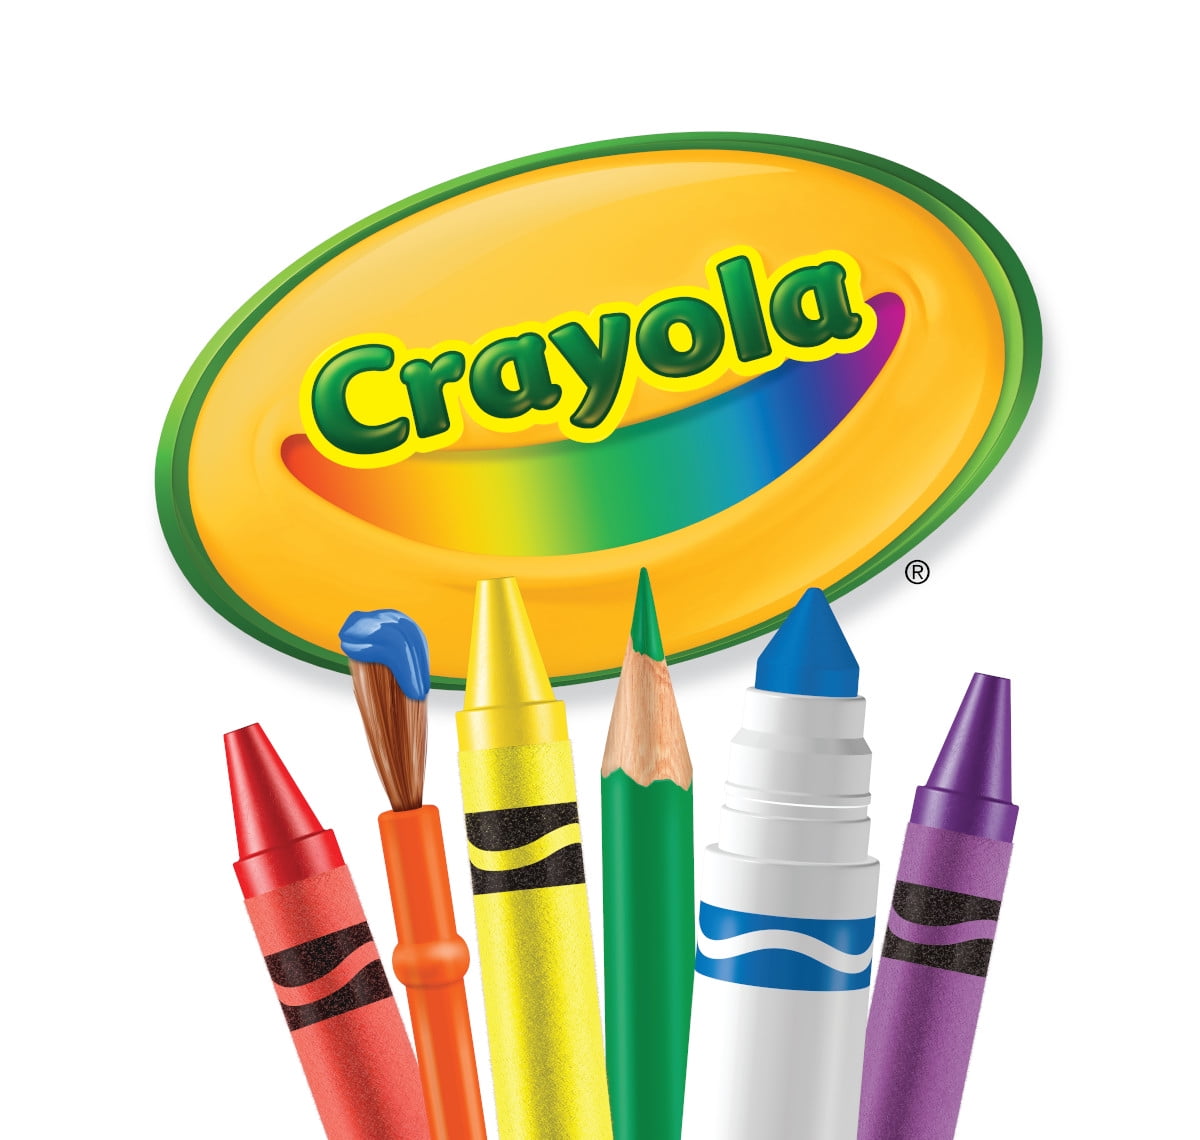 Crayola Project XL Black Poster Marker